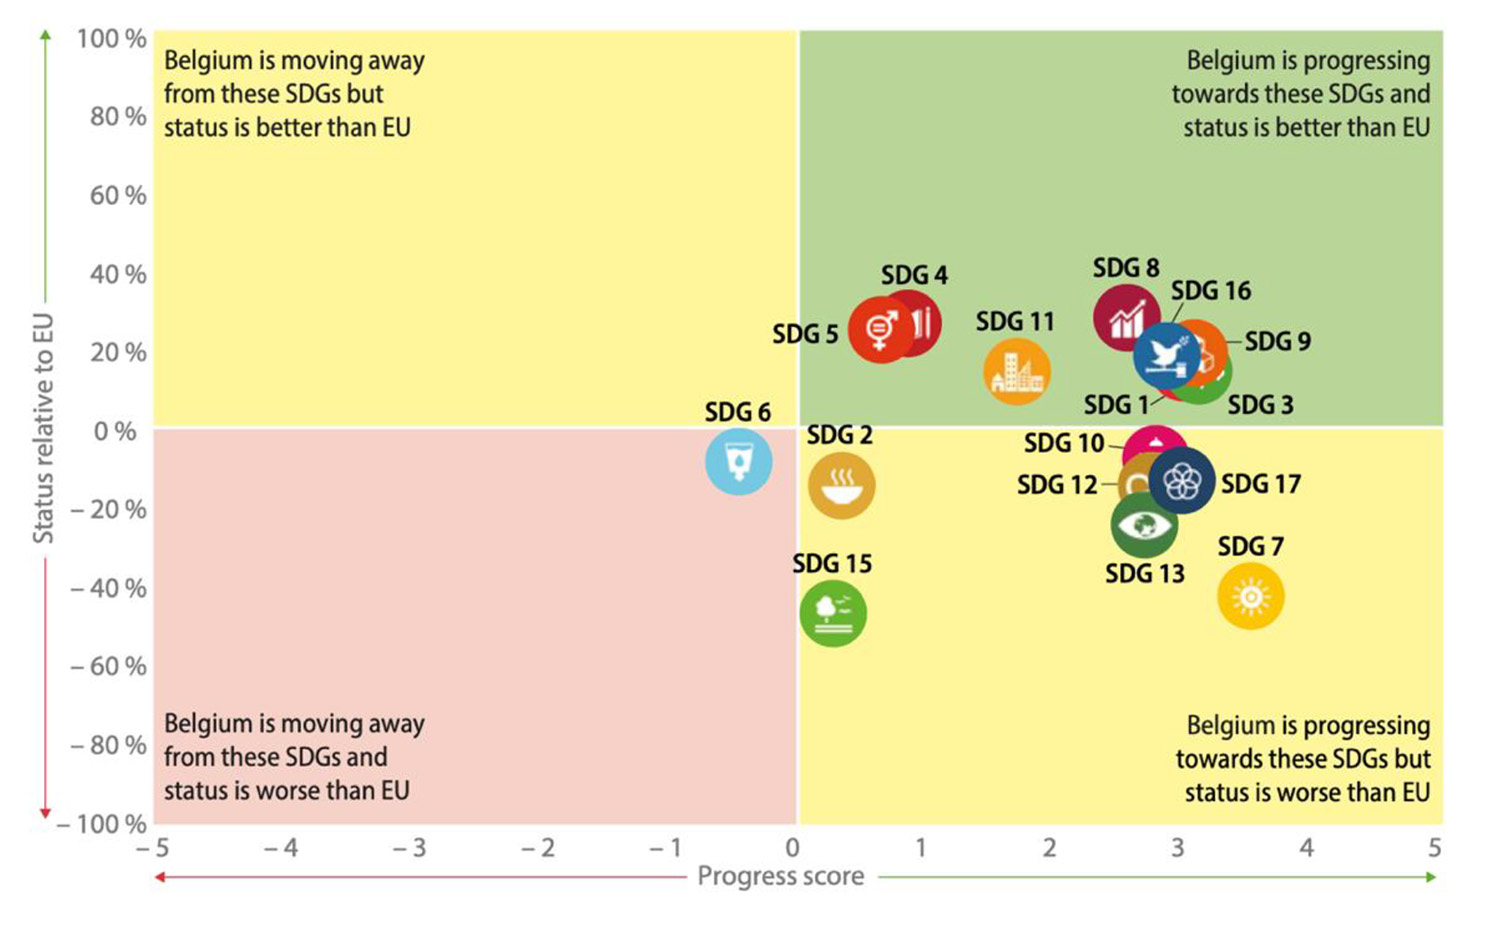 Image SDGs compared to other countries